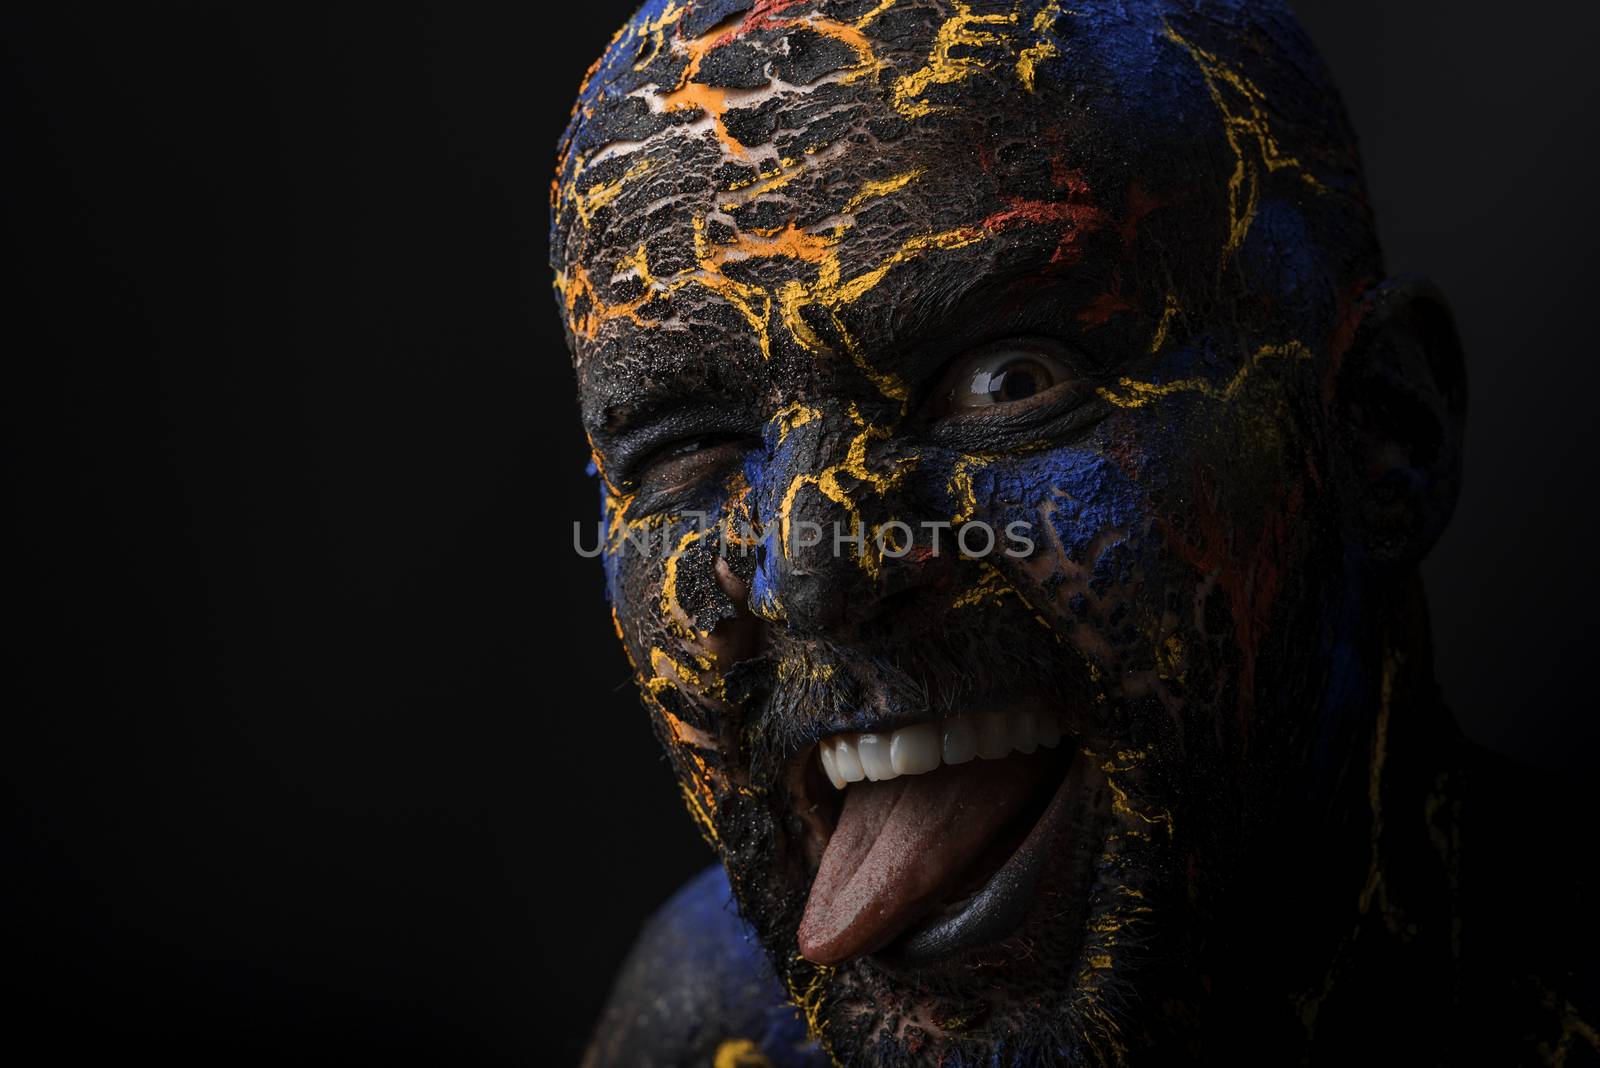 Conceptual Portrait of a brutal man painted in face art style over black background